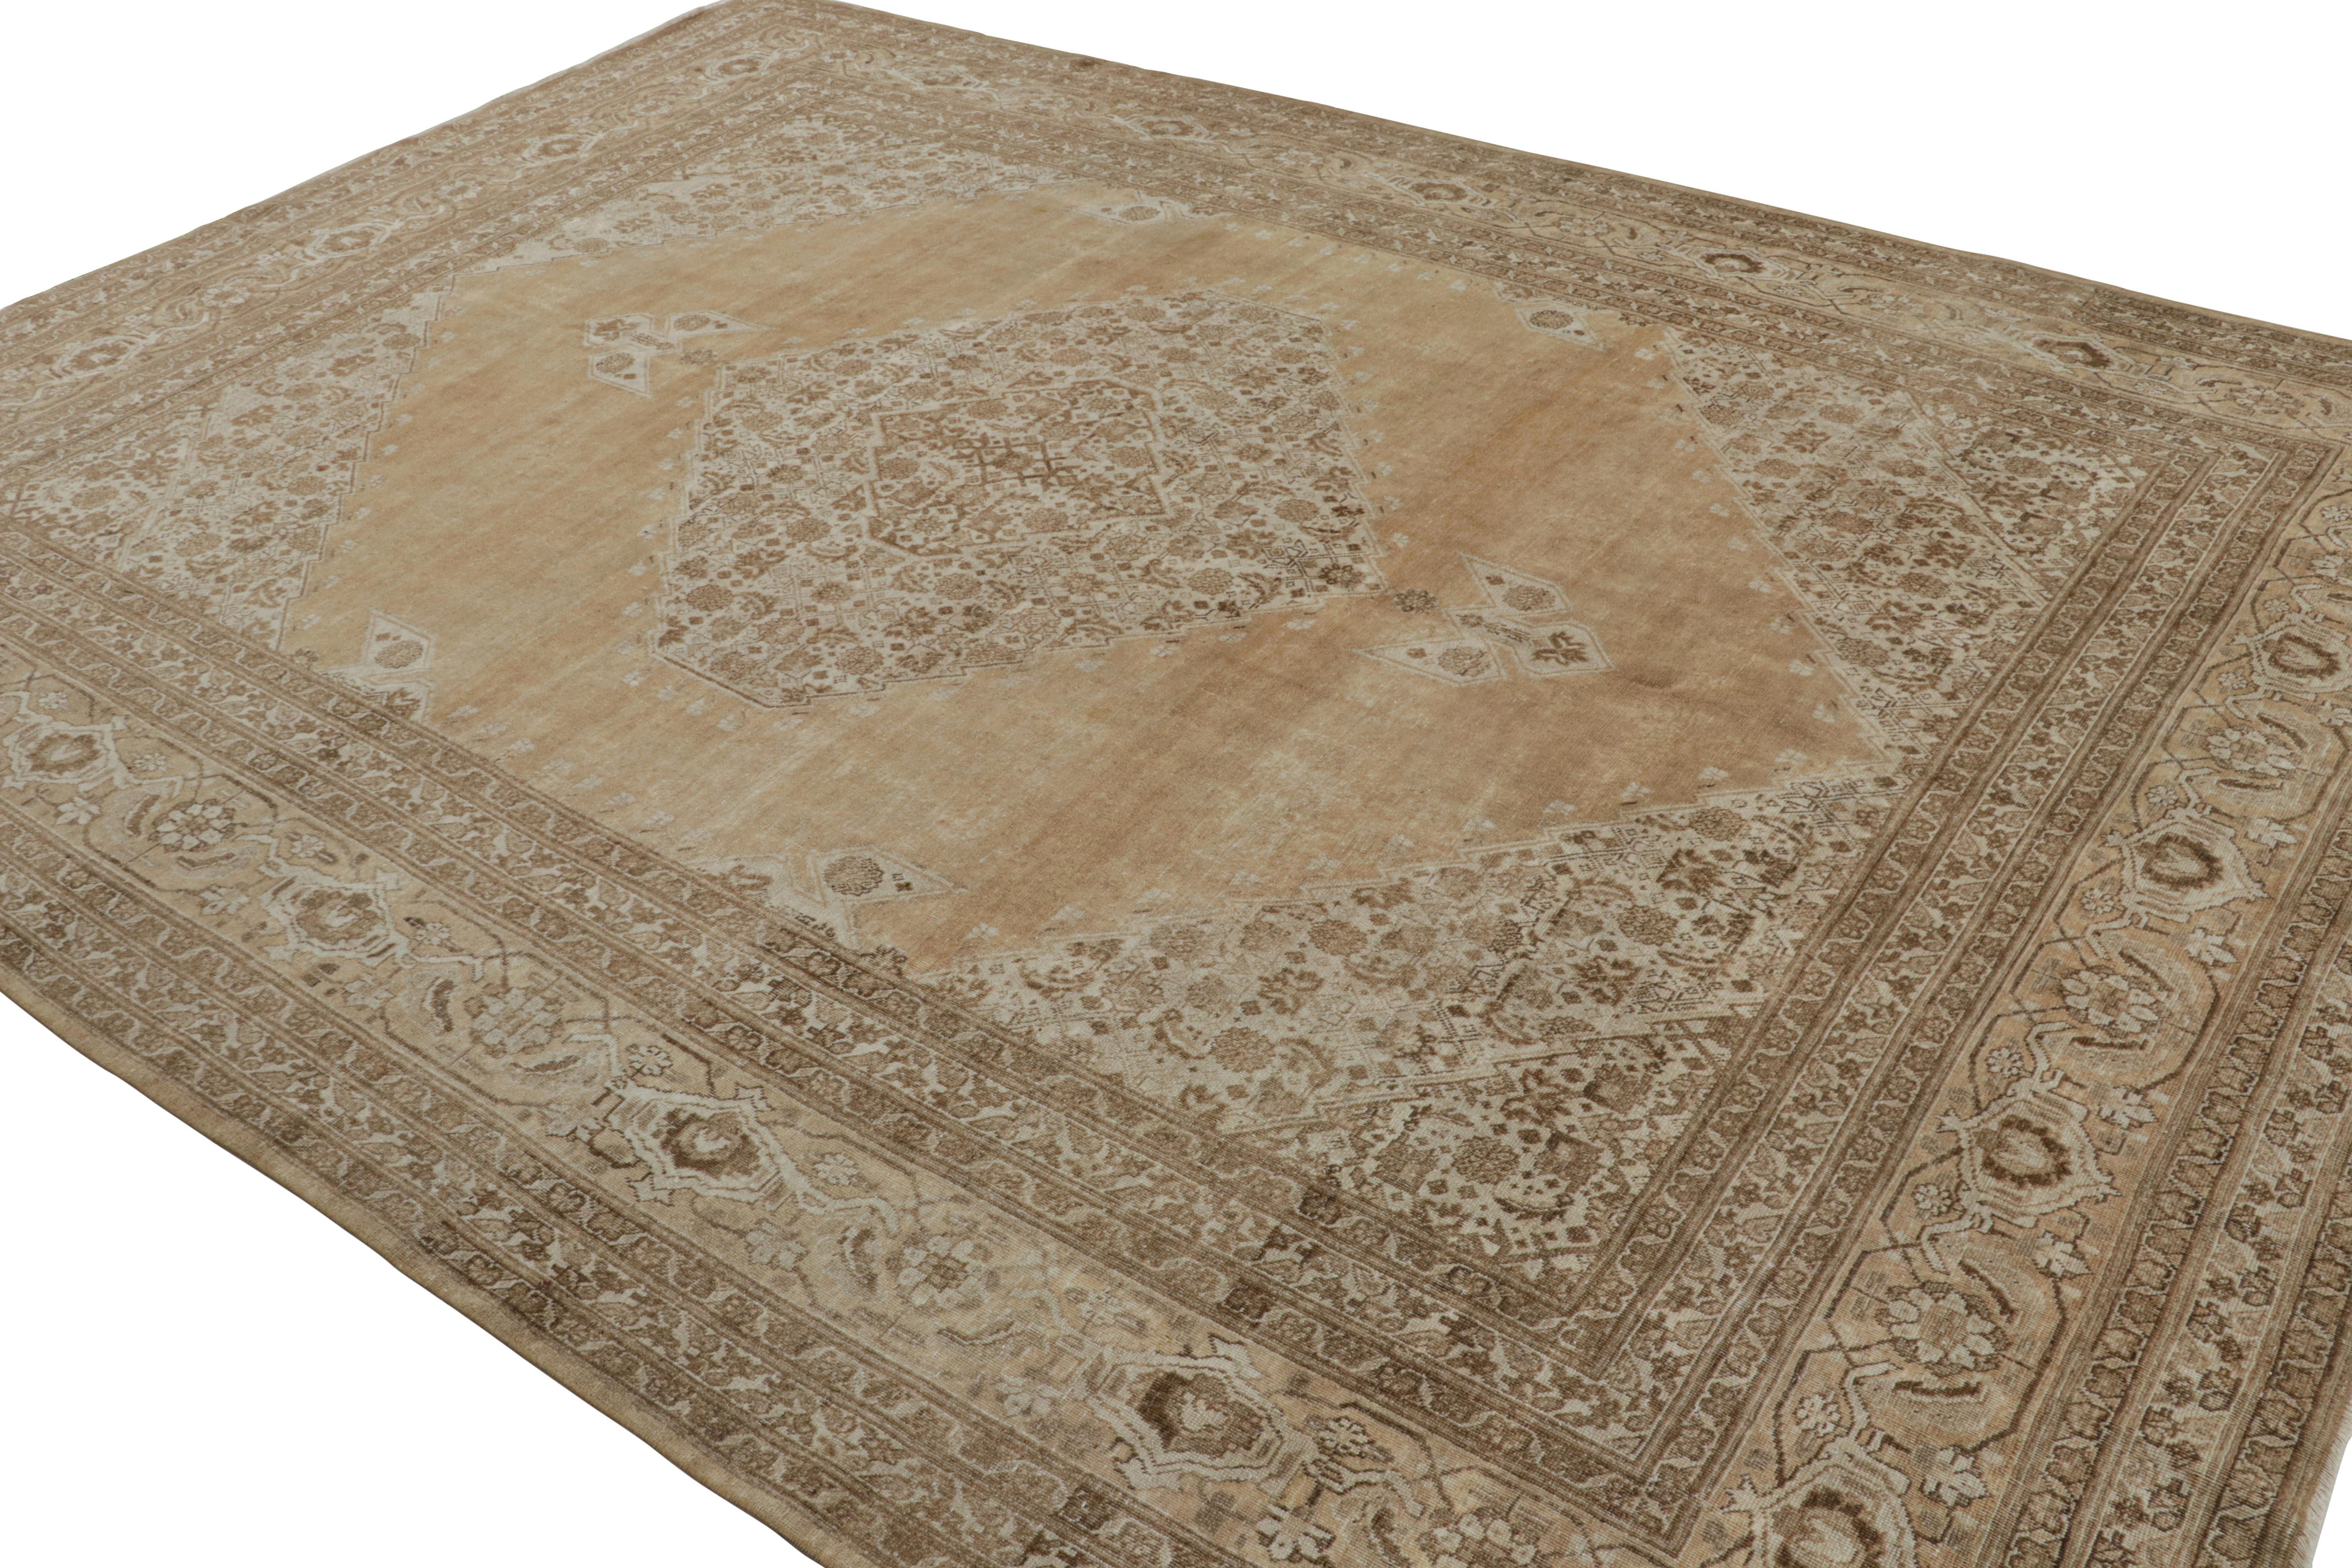 Hand-knotted in luxurious wool, this 9x12 antique Persian Tabriz rug features a rich design combination of floral patterns, medallions and open field style, which is almost unusual for a Tabriz rug to enjoy but masterfully done as they are. 

On the